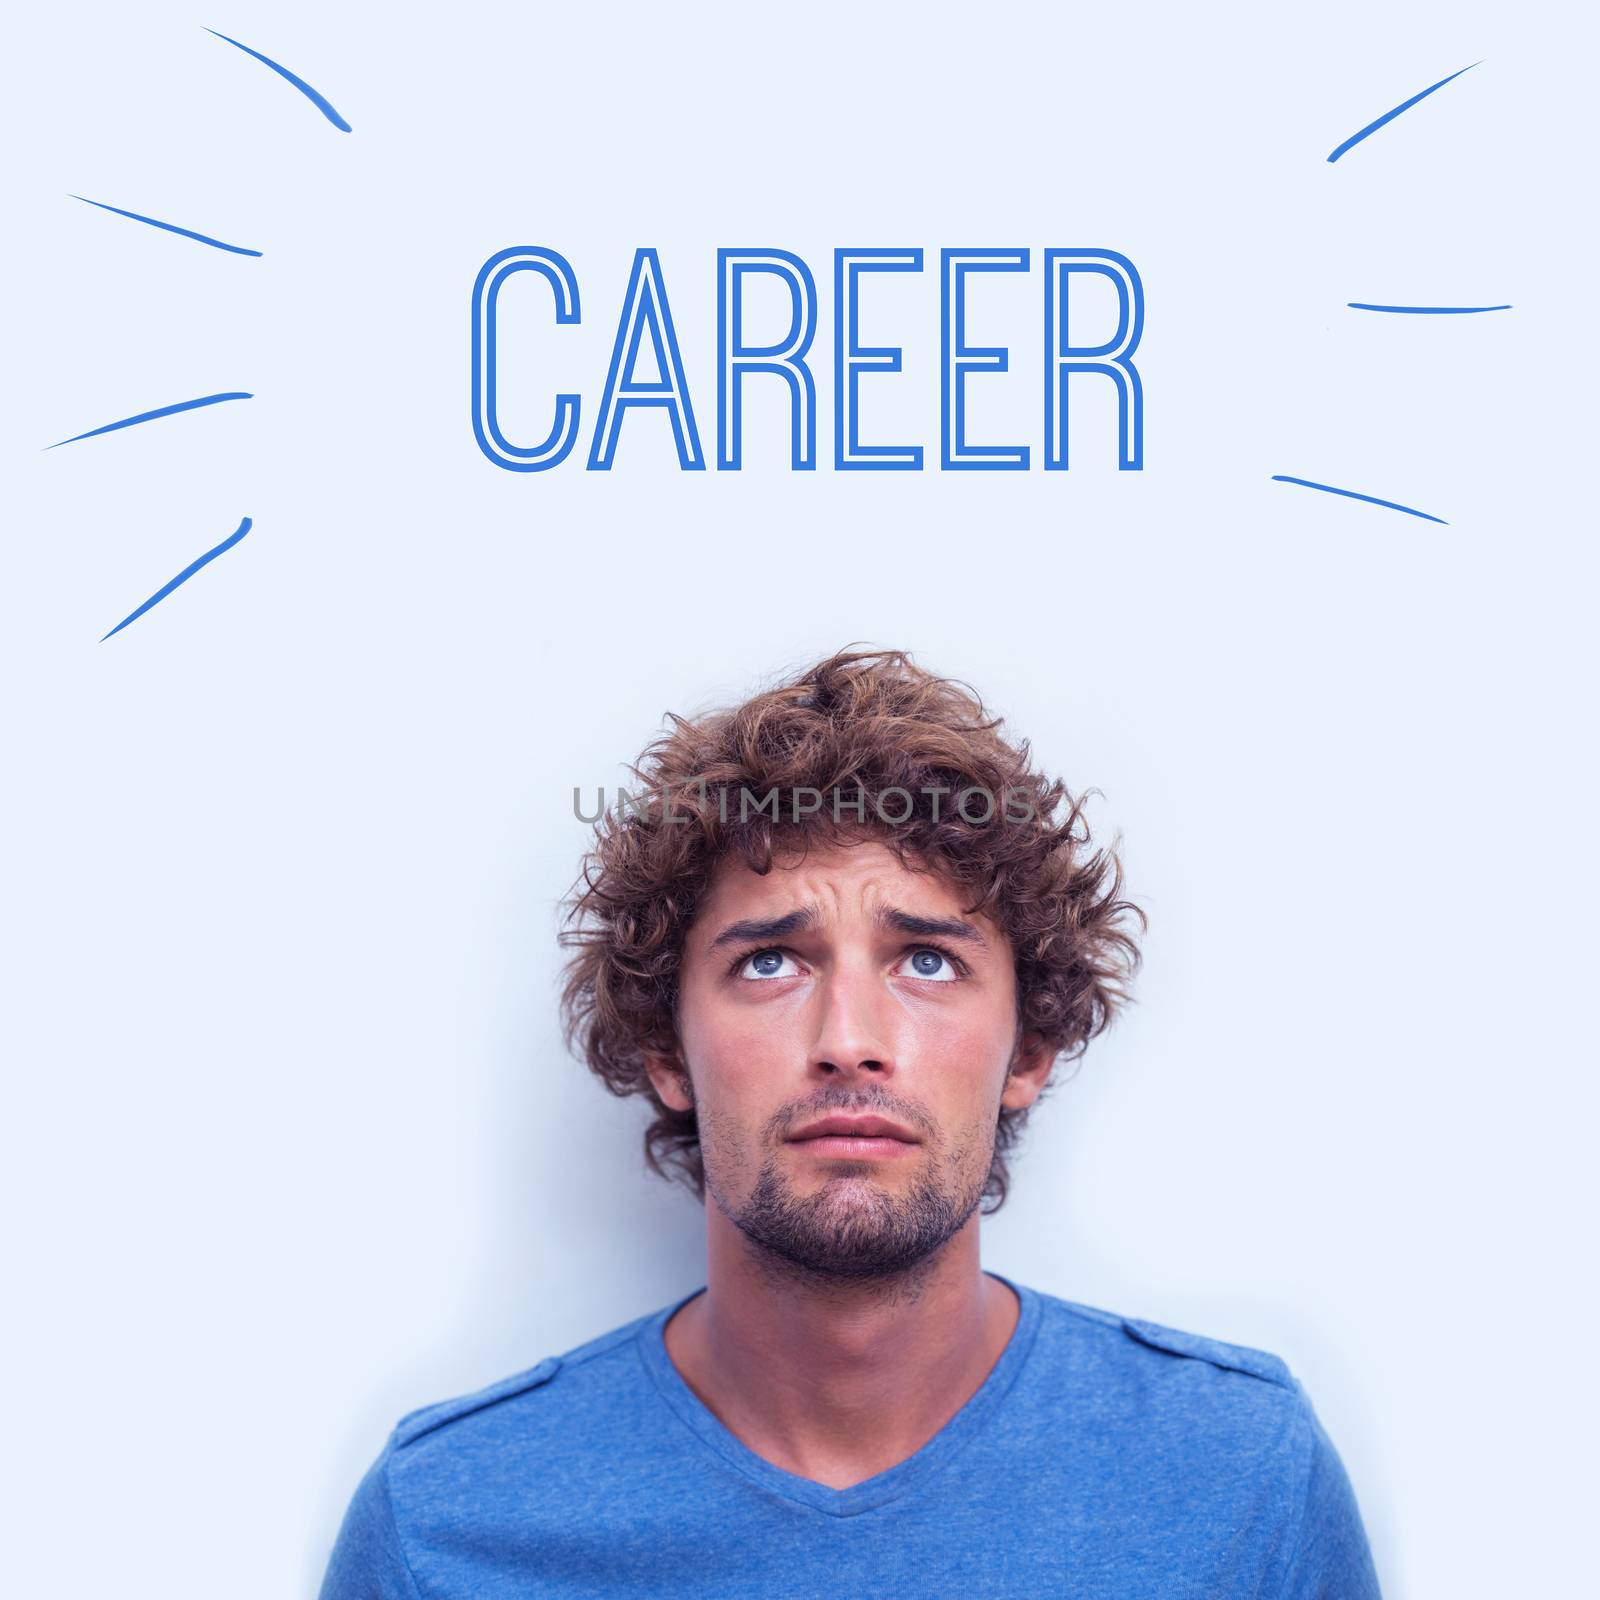 The word career against anxious student